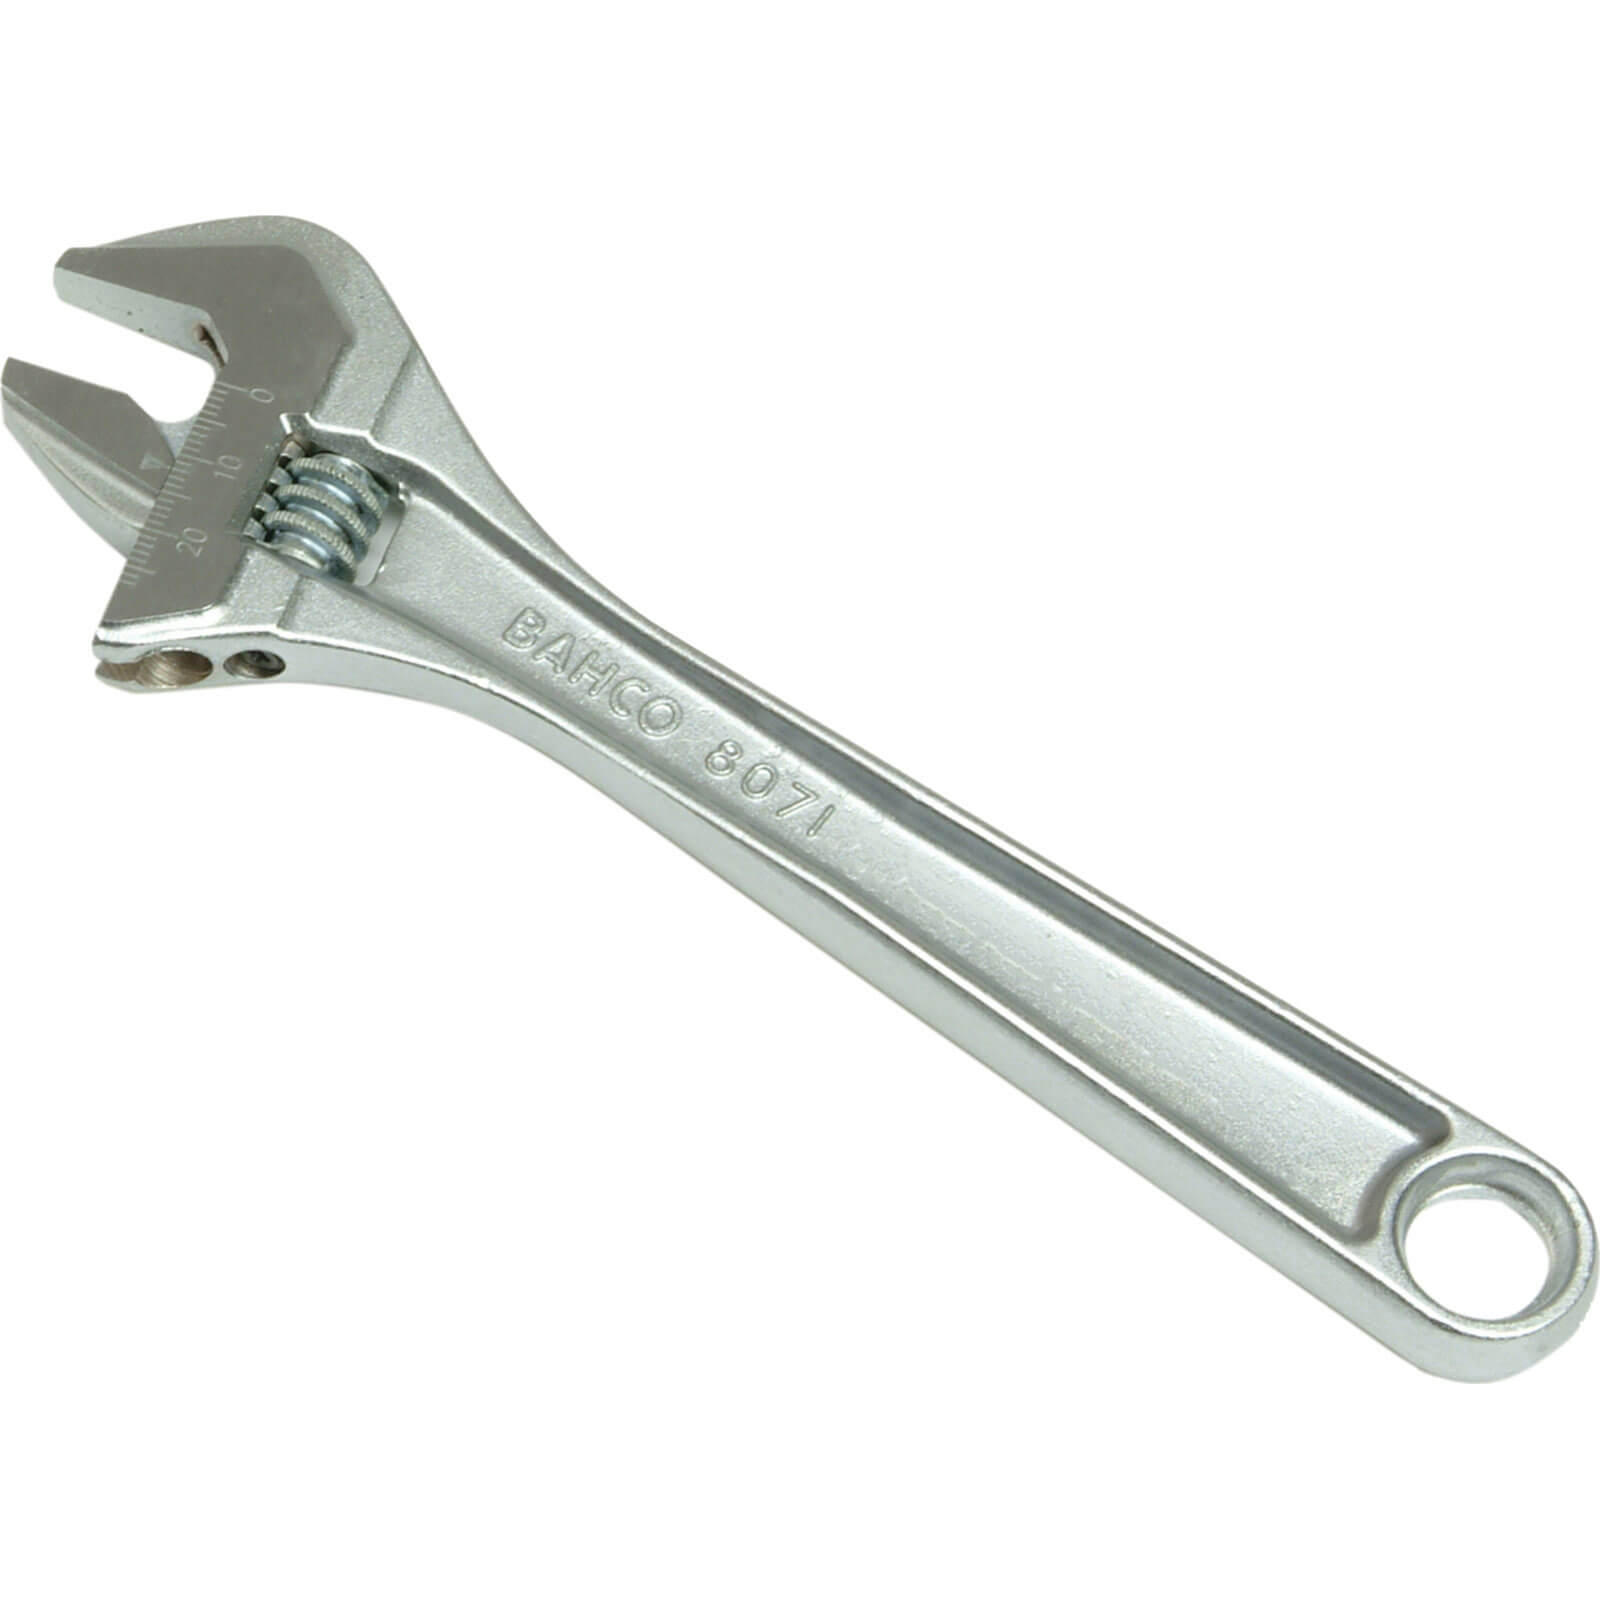 Photo of Bahco 80 Series Adjustable Spanner 300mm